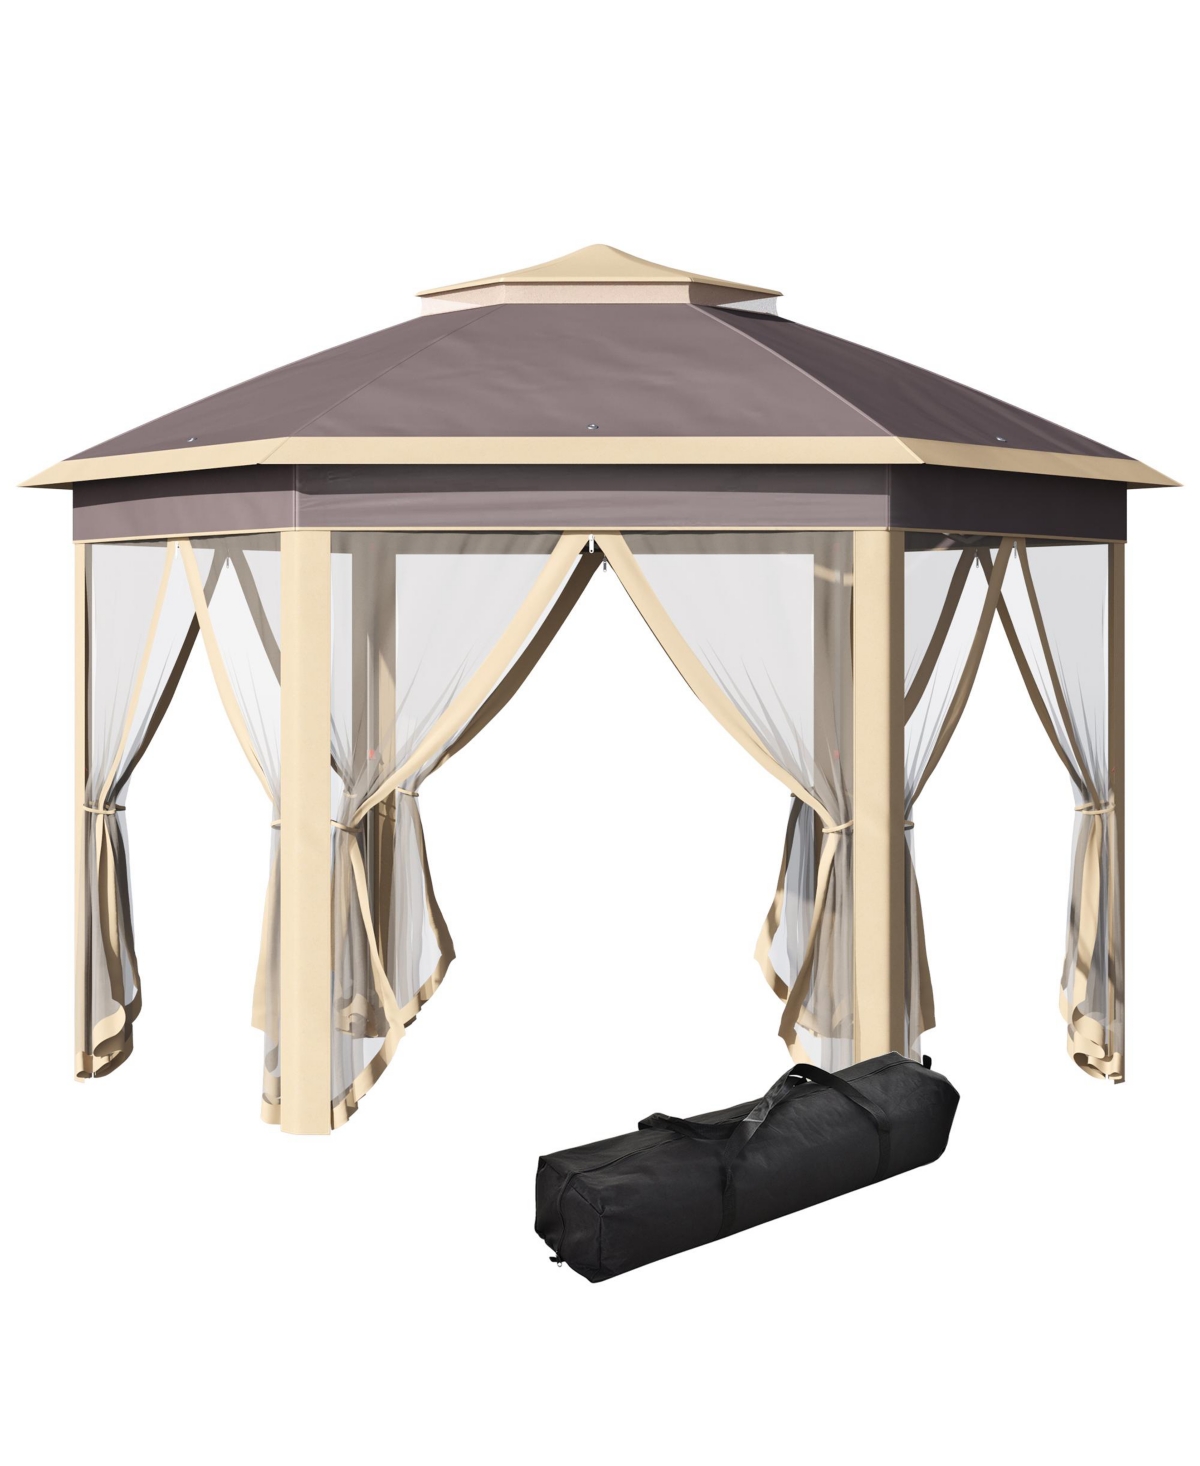 13'x11' Pop Up Gazebo, Double Roof Canopy Tent with Zippered Mesh Sidewalls, Height Adjustable and Carrying Bag, Event Tent for Patio Garden